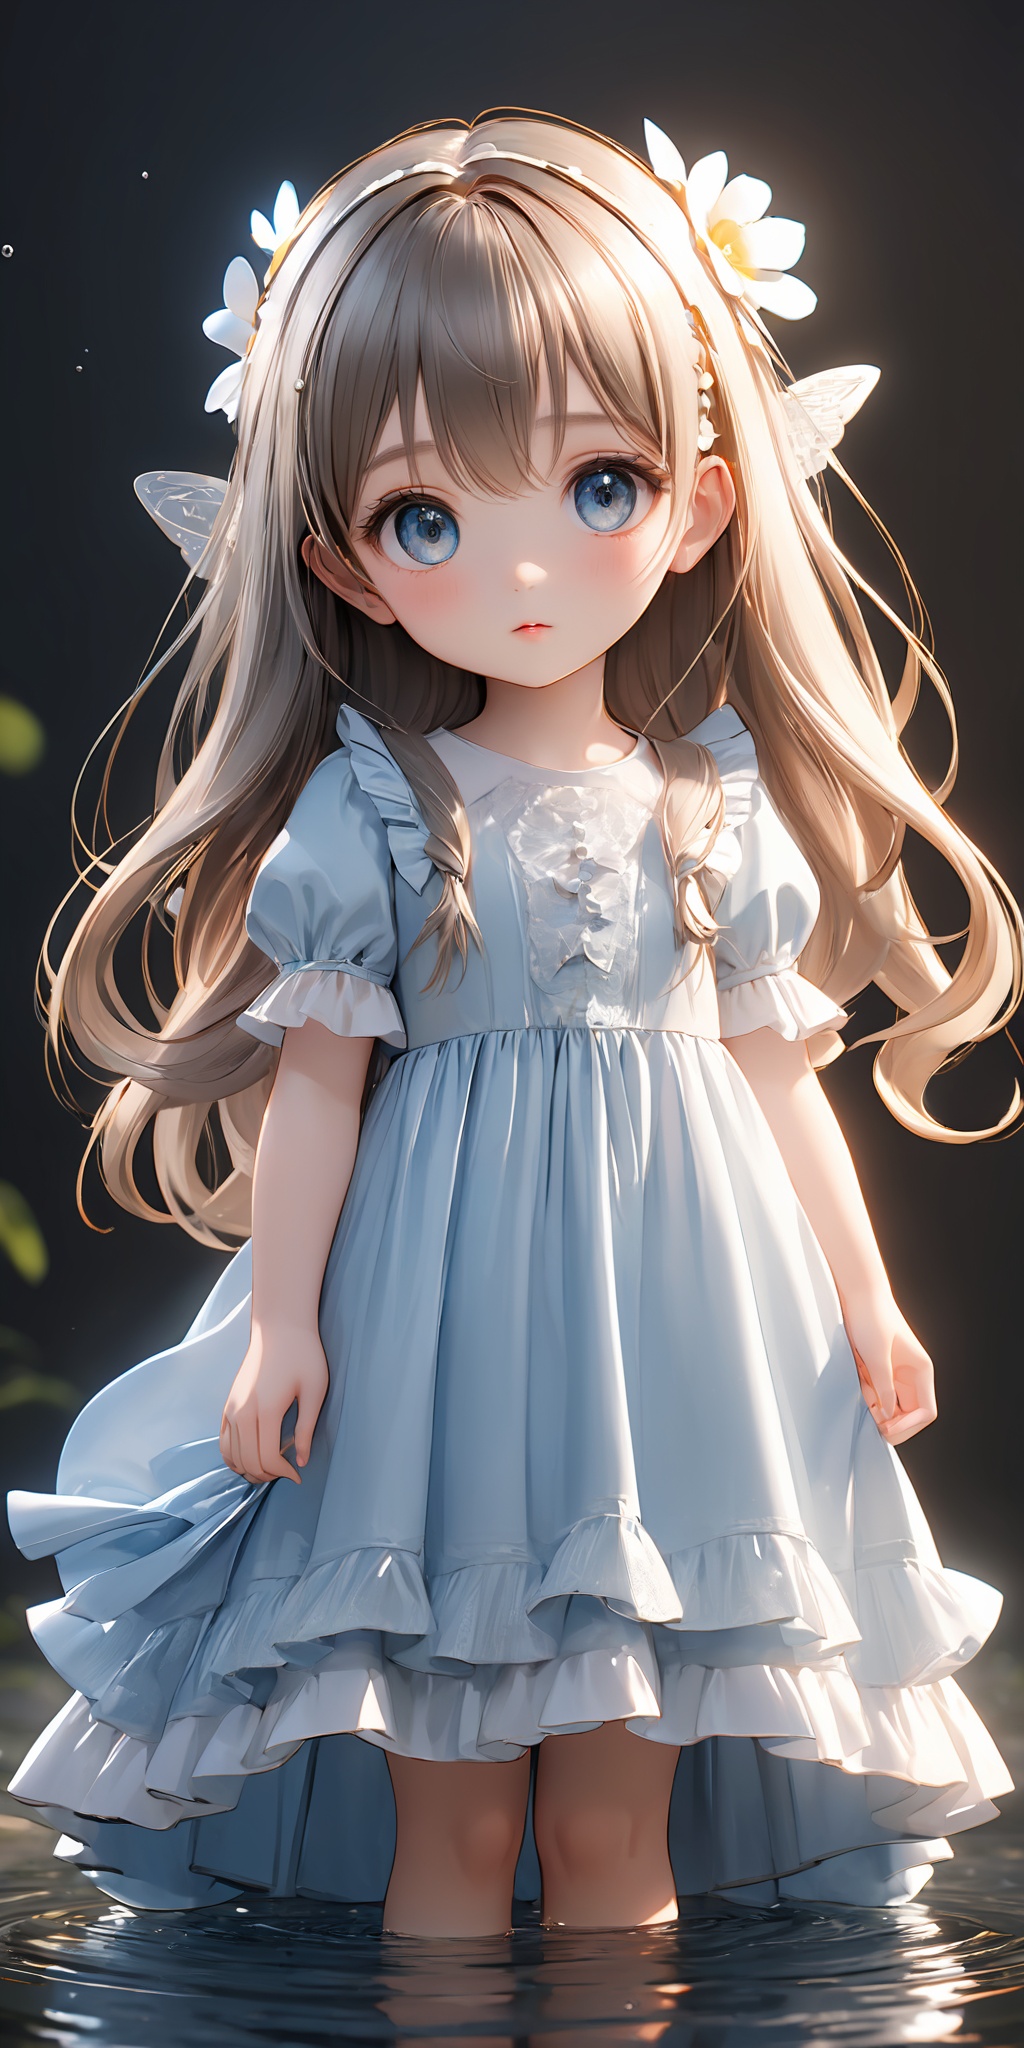  best_quality, extremely detailed details,loli,solo,1 girl,full_body,
pretty face,extremely delicate and beautiful girls,(beautiful detailed eyes),very_long_hair,cuteface,babyface,bare_foot,white_background,
cute0000,bl-ku,

 Highest picture quality, masterpiece, exquisite CG, exquisite and complicated hair accessories, big watery eyes, highlights, natural light, Super realistic, cinematic lighting texture, absolutely beautiful, 3D max, vray, c4d, ue5, corona rendering, redshift, octane rendering, （Show whole body）, （all body）,